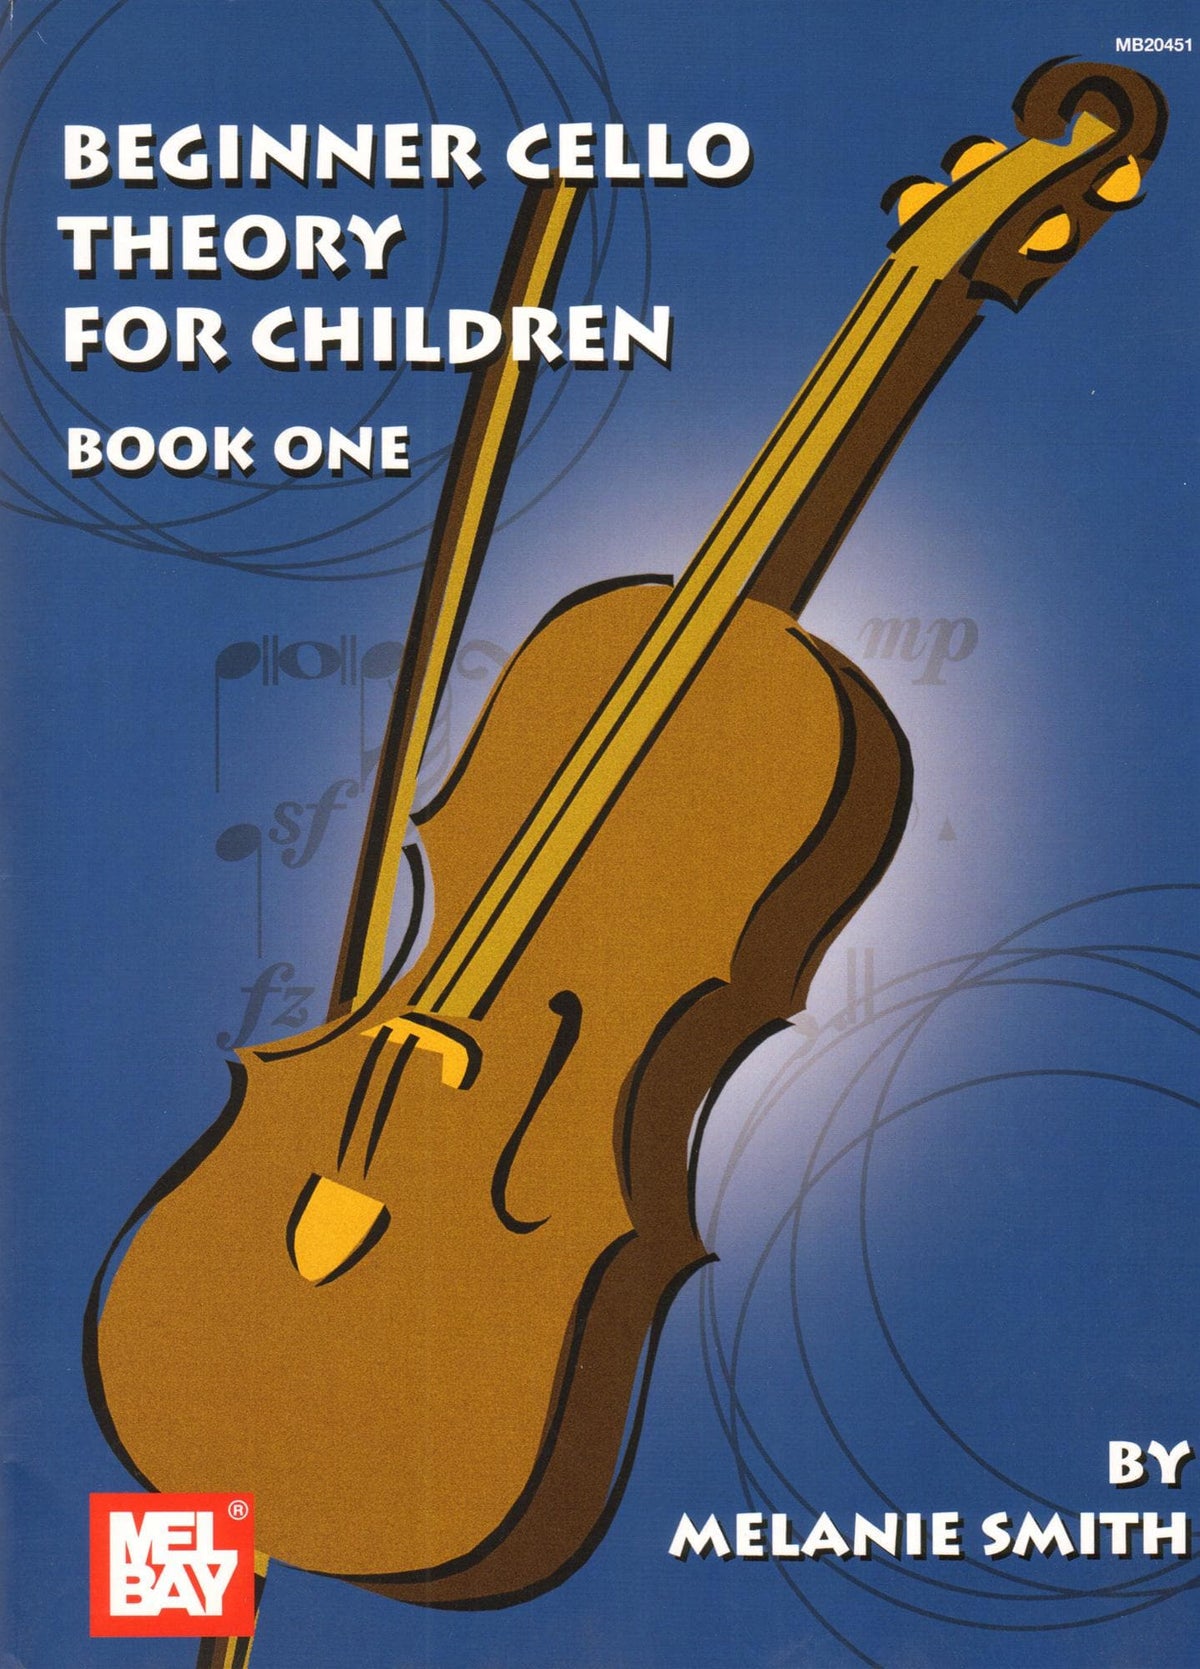 Beginner Cello Theory for Children - Book 1 by Melanie Smith - Mel Bay Publication